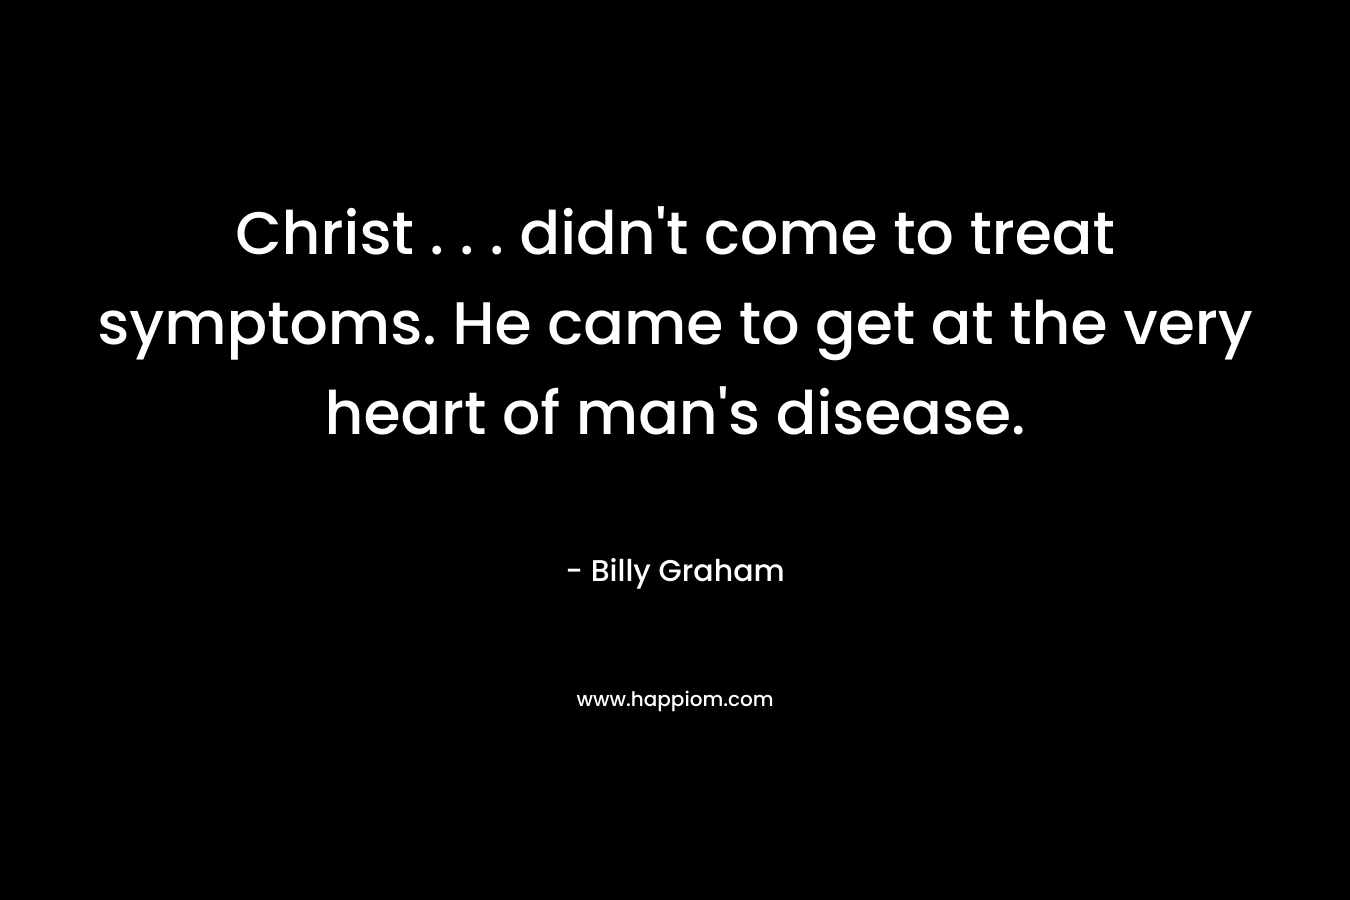 Christ . . . didn’t come to treat symptoms. He came to get at the very heart of man’s disease. – Billy Graham